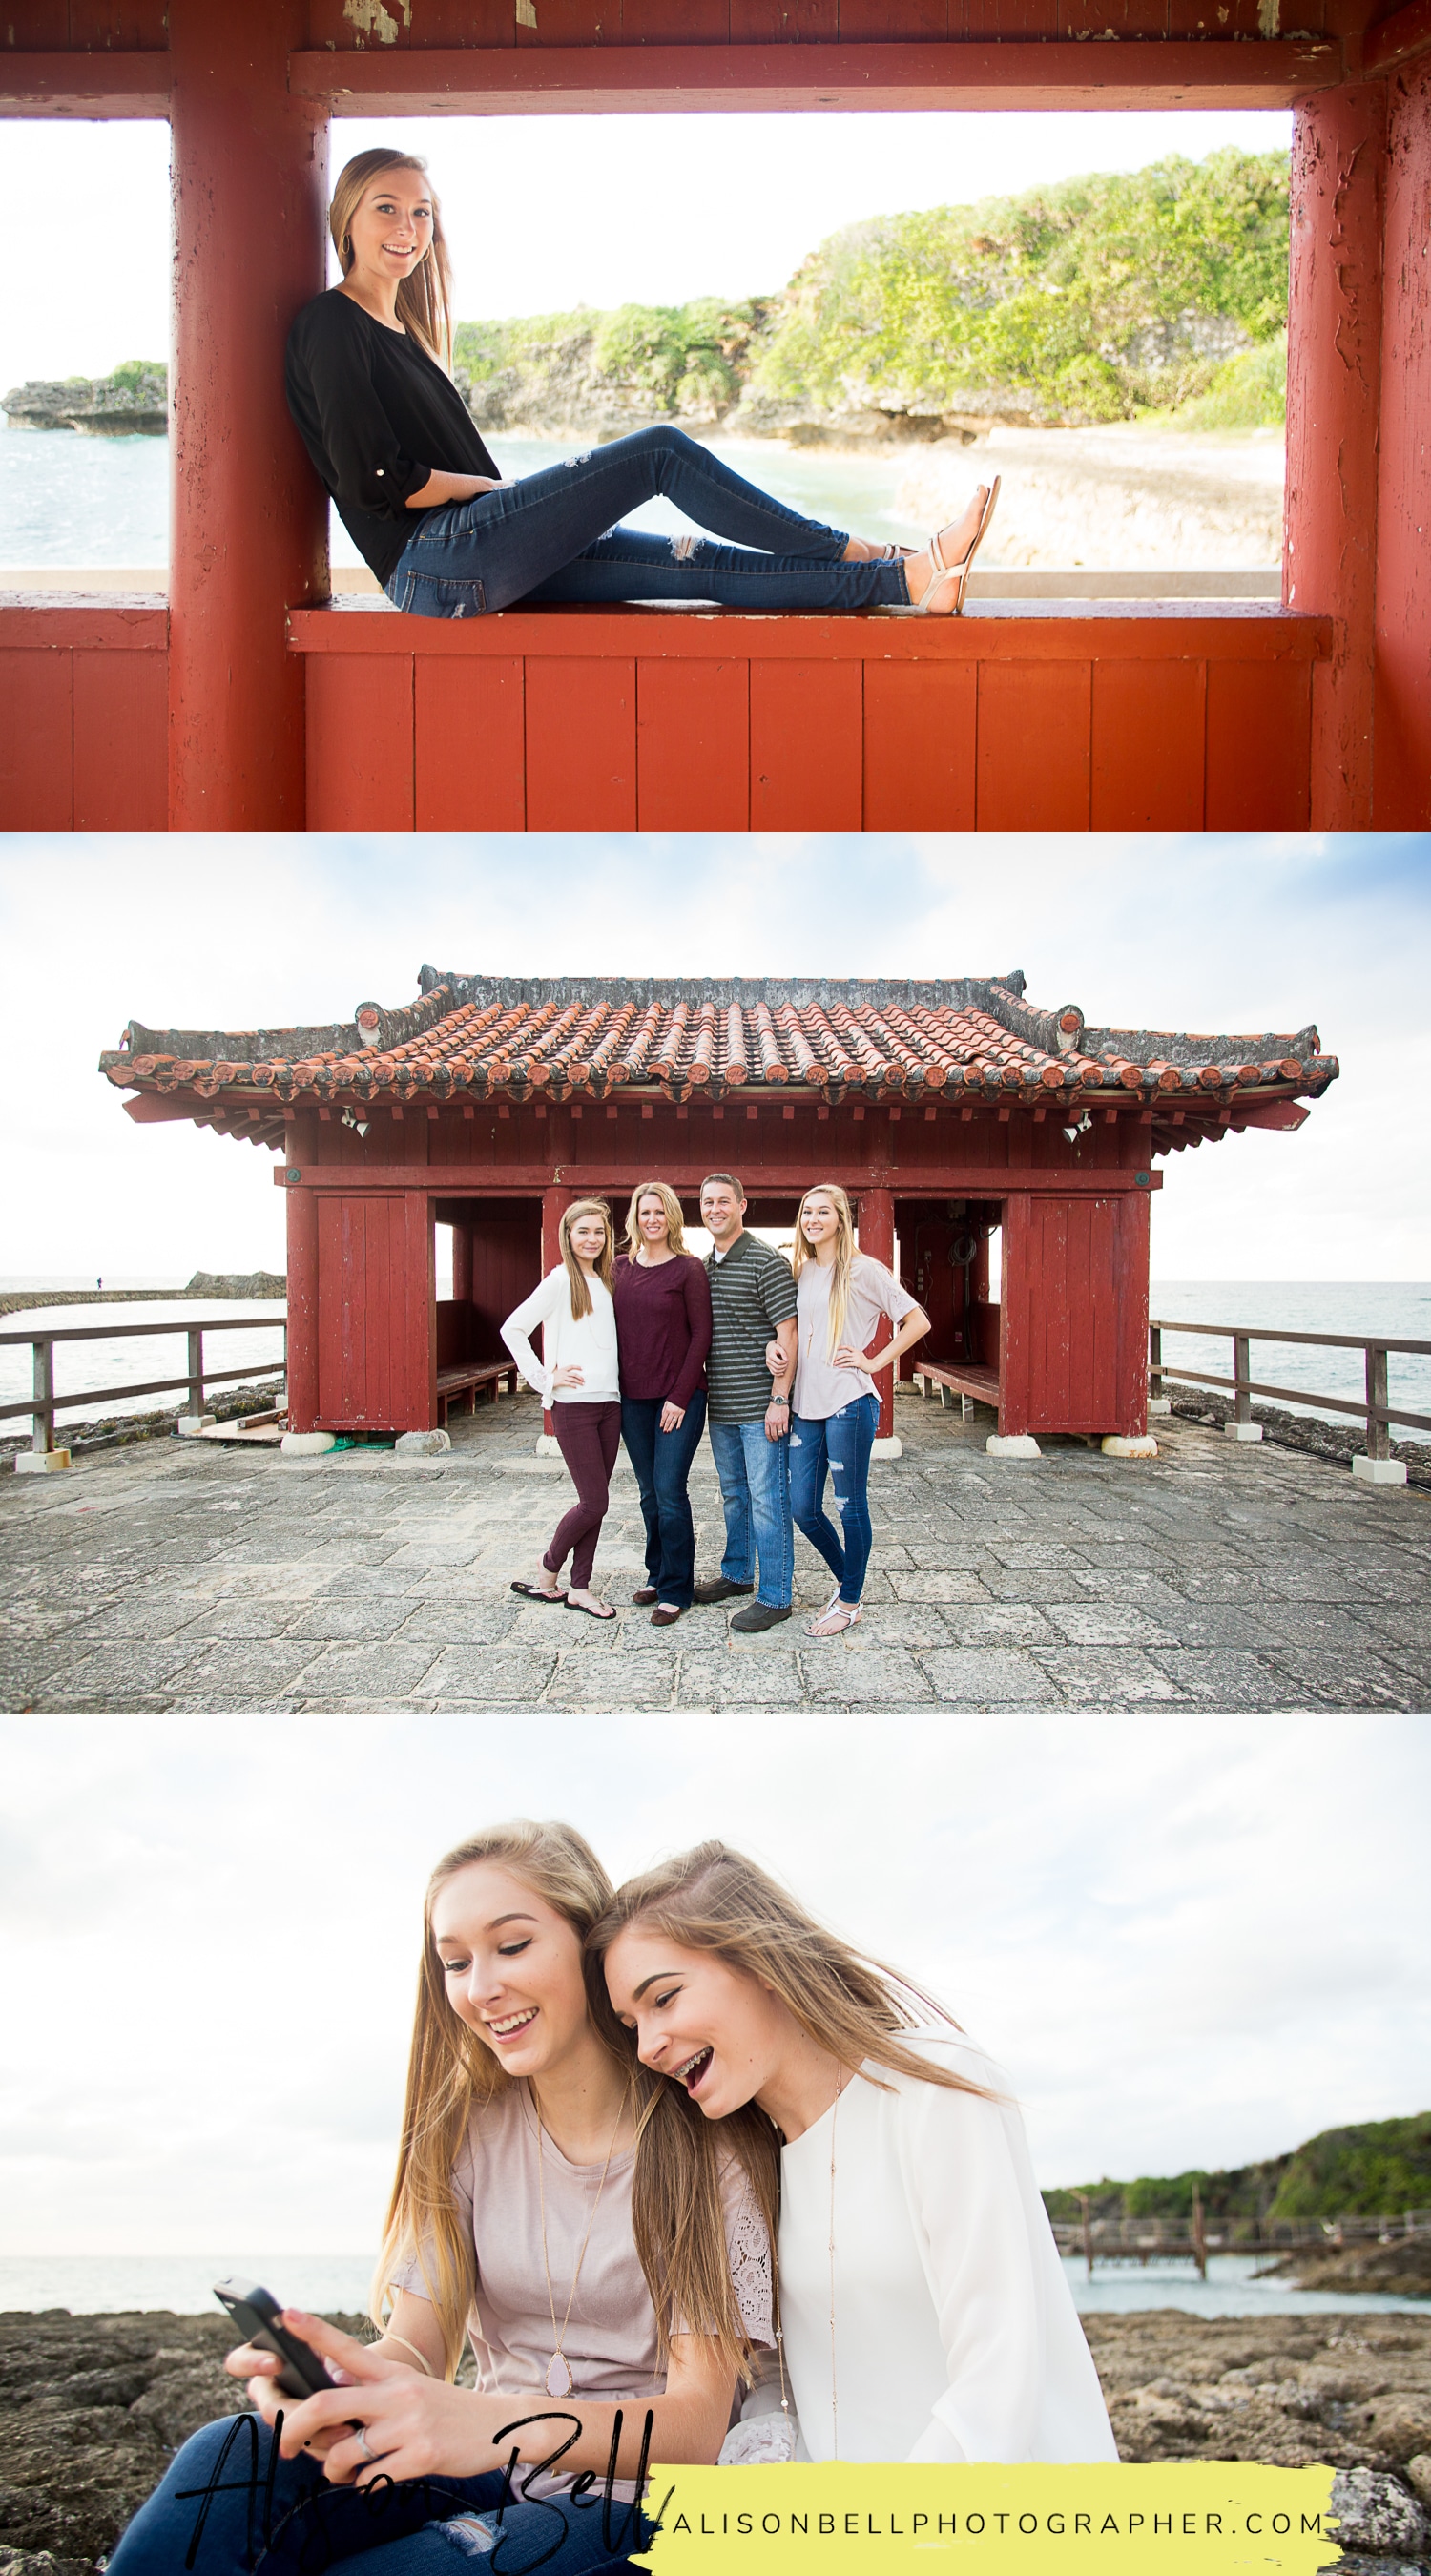 Senior portraits and family session in one. #simplesenior in Okinawa Japan by Alison Bell, Photographer #alisonbellphotog www.alisonbellphotographer.com